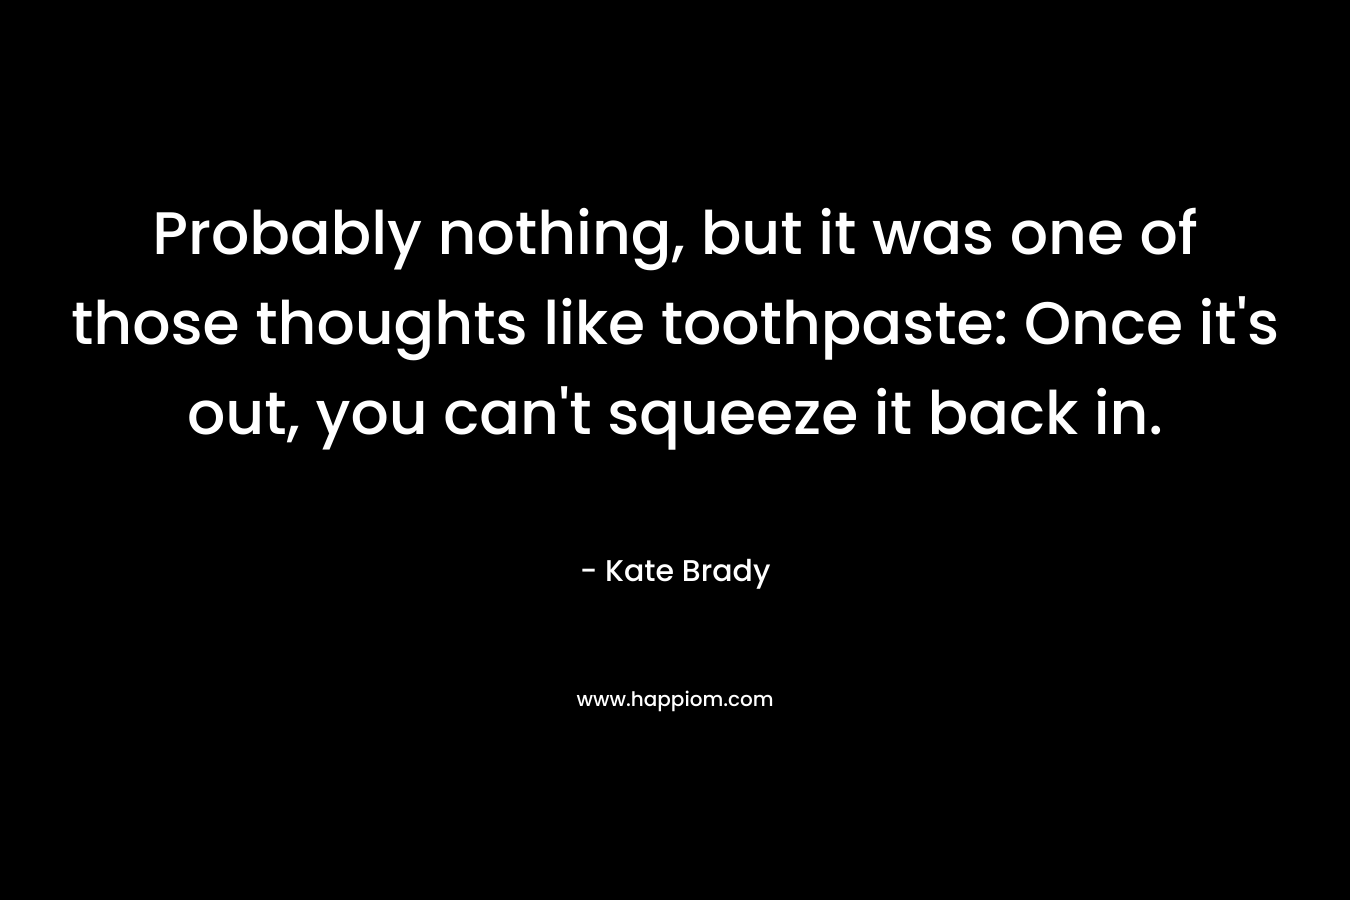 Probably nothing, but it was one of those thoughts like toothpaste: Once it's out, you can't squeeze it back in.